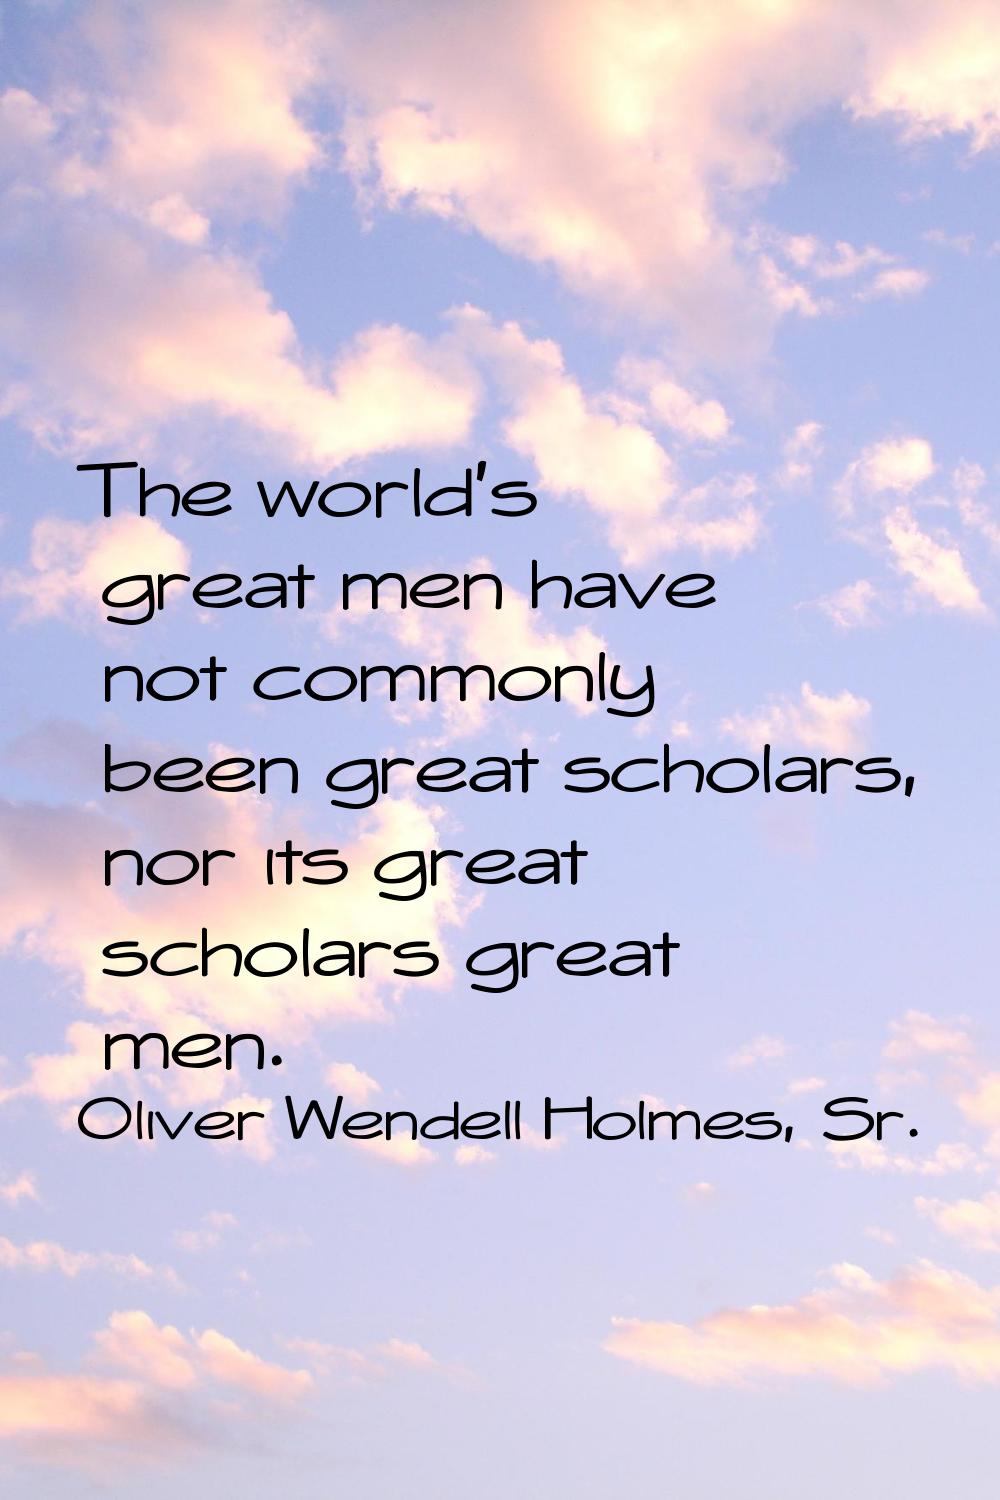 The world's great men have not commonly been great scholars, nor its great scholars great men.